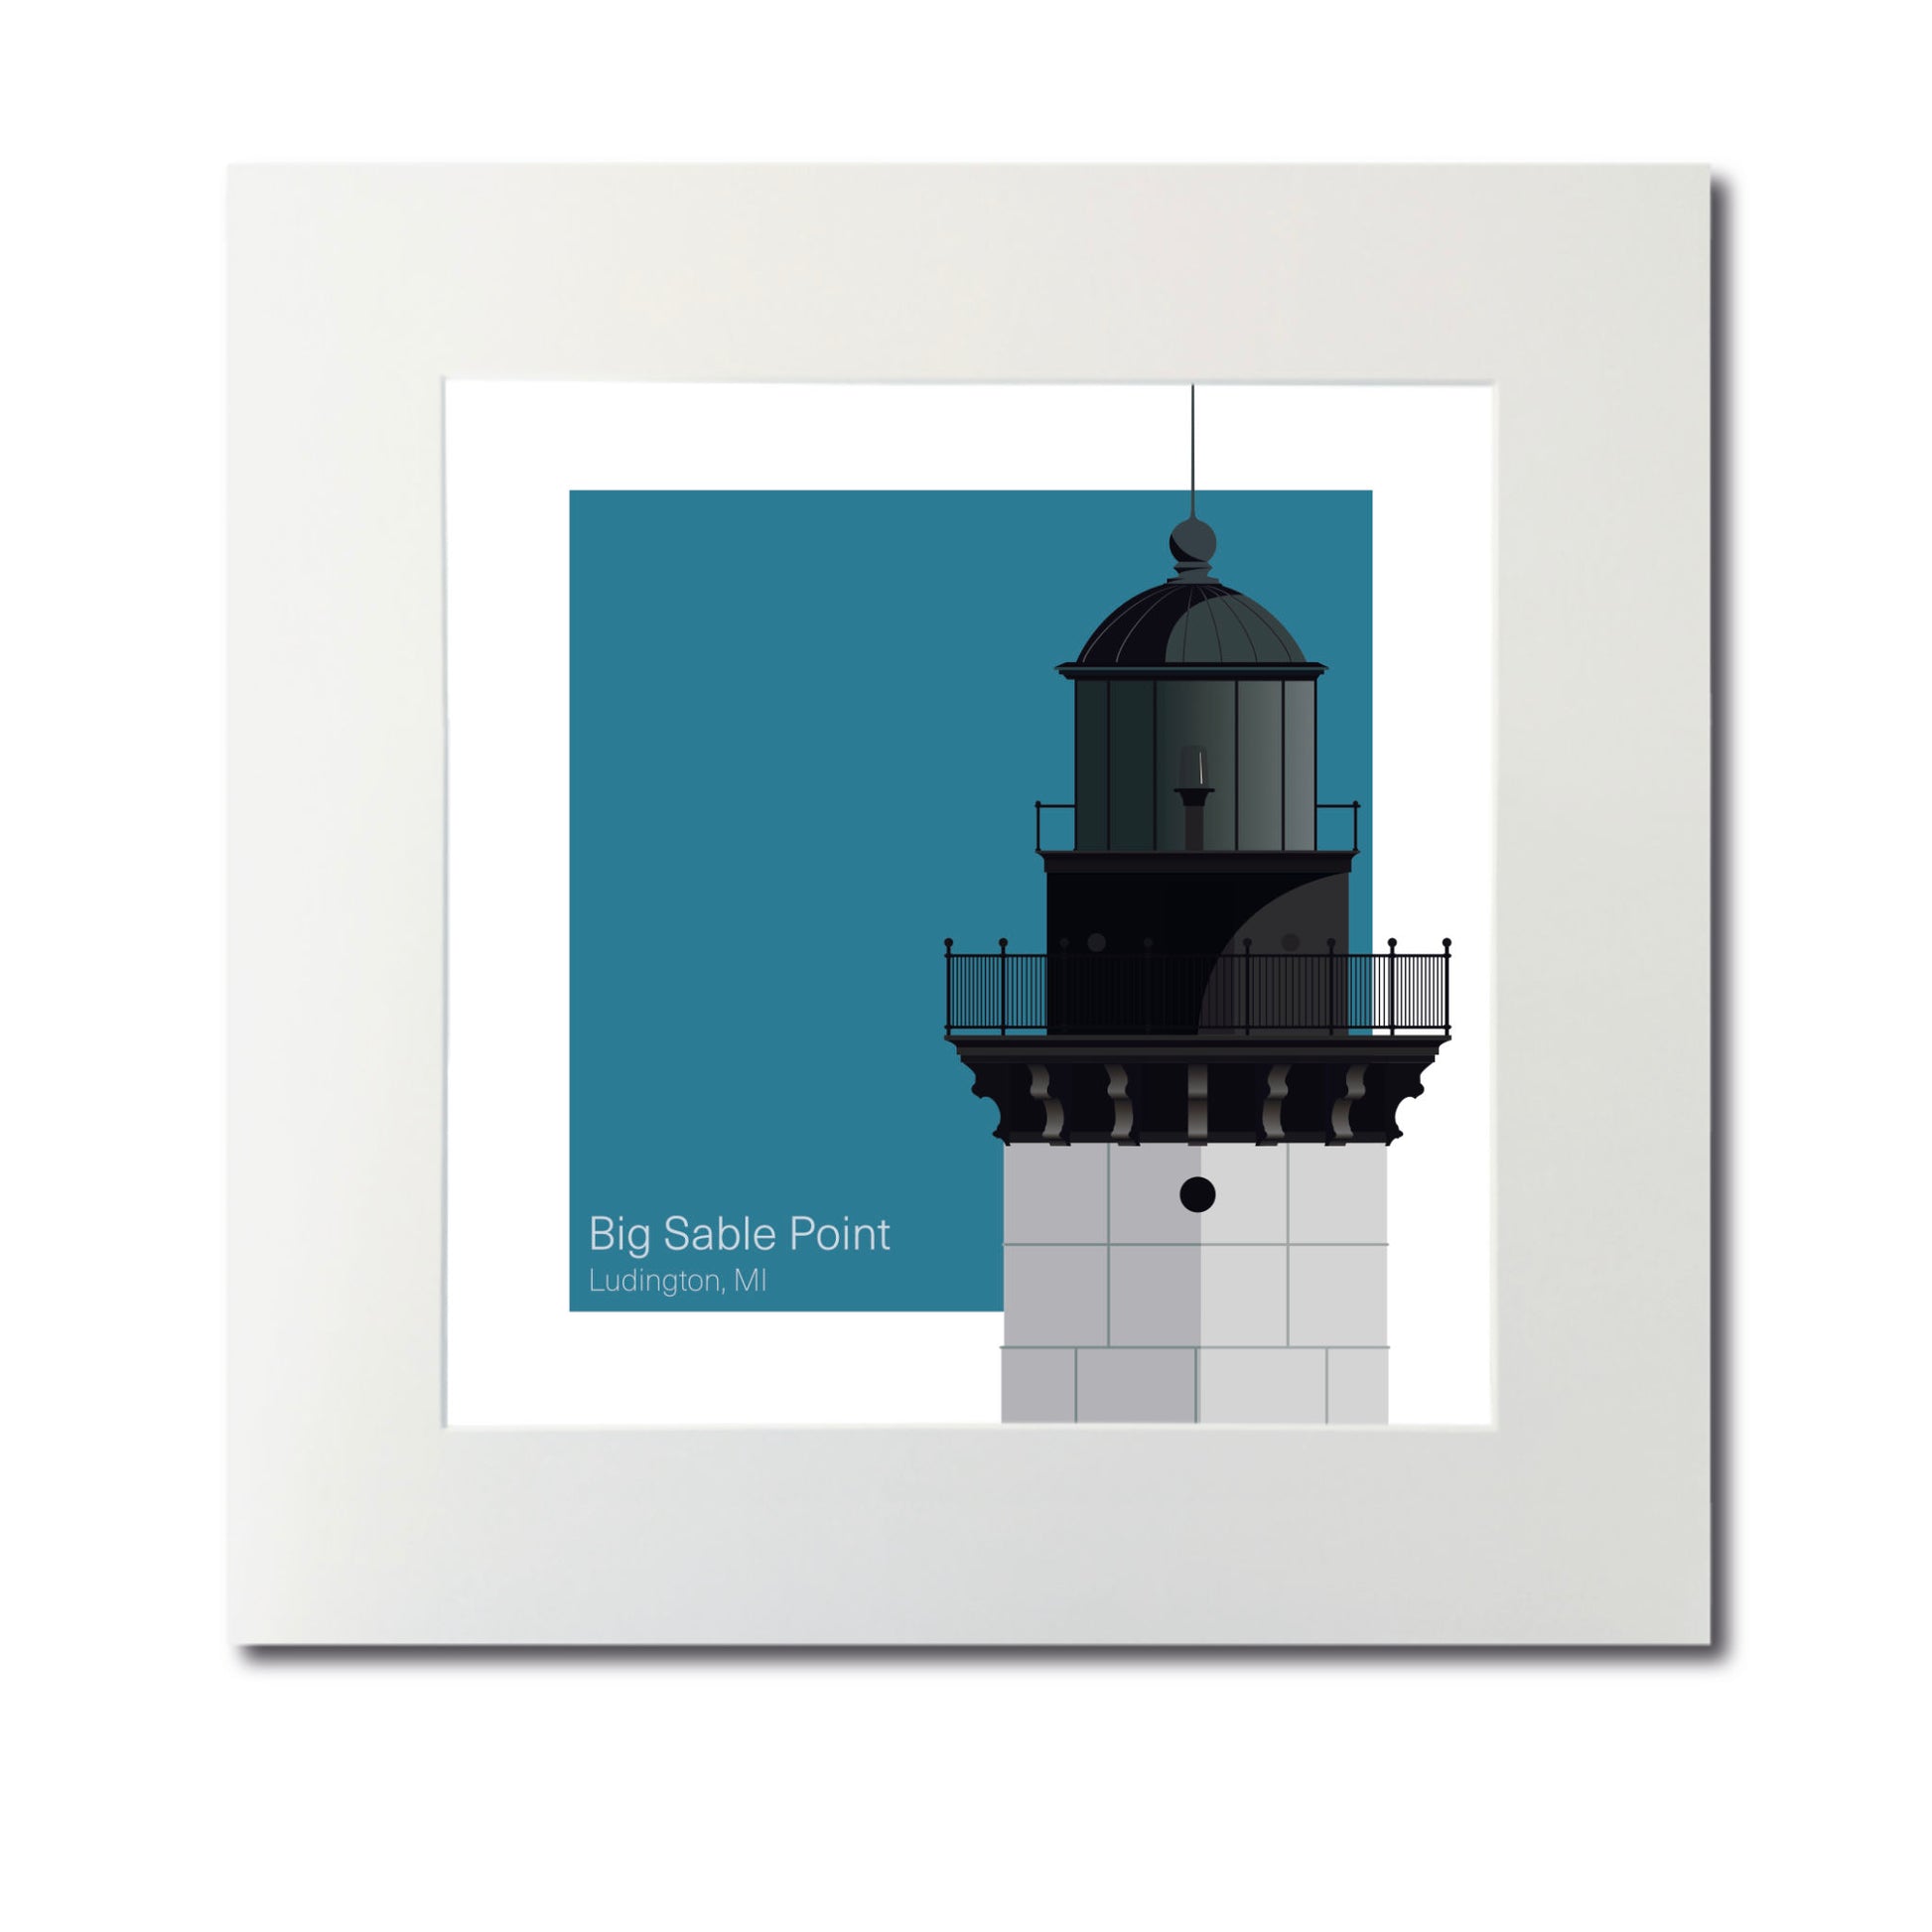 Illustration of the Big Sable Point lighthouse, MI, USA. On a white background with aqua blue square as a backdrop., mounted and measuring 12"x12" (30x30cm).